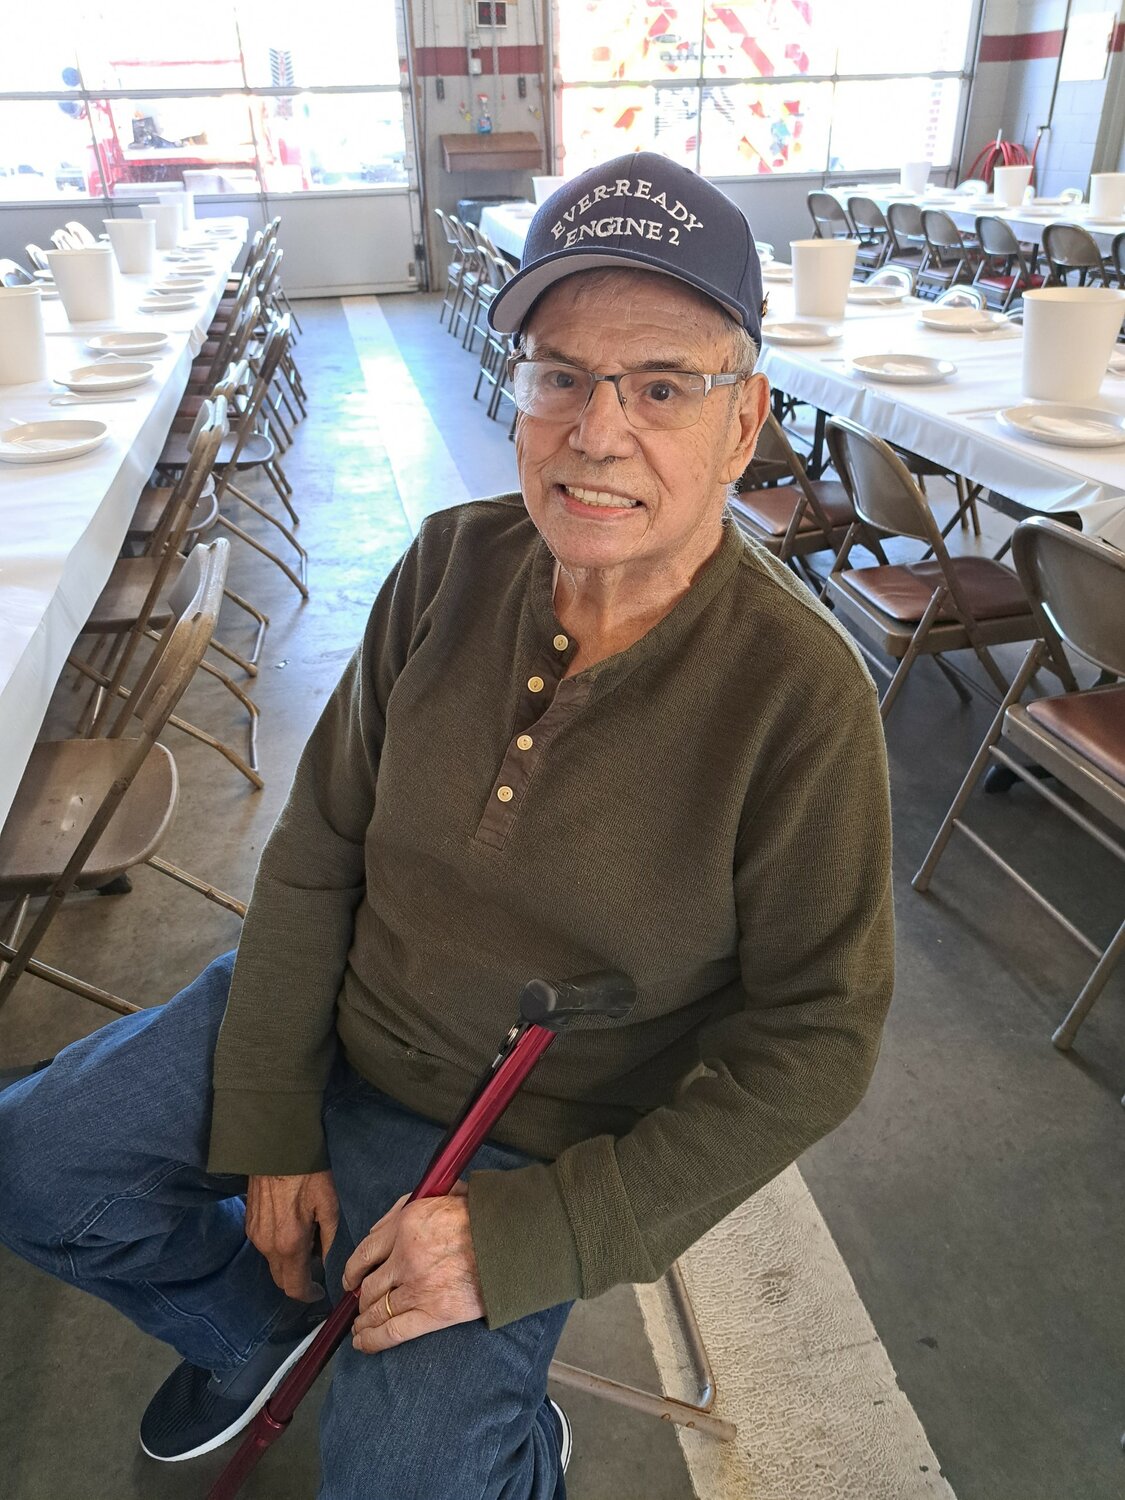 Herculano "Okie" Falcoa, one of the elder statesmen in the Bristol Fire Dept. with 64 years of service, was one of the first to arrive at Friday's annual Old-Timers Clamboil.